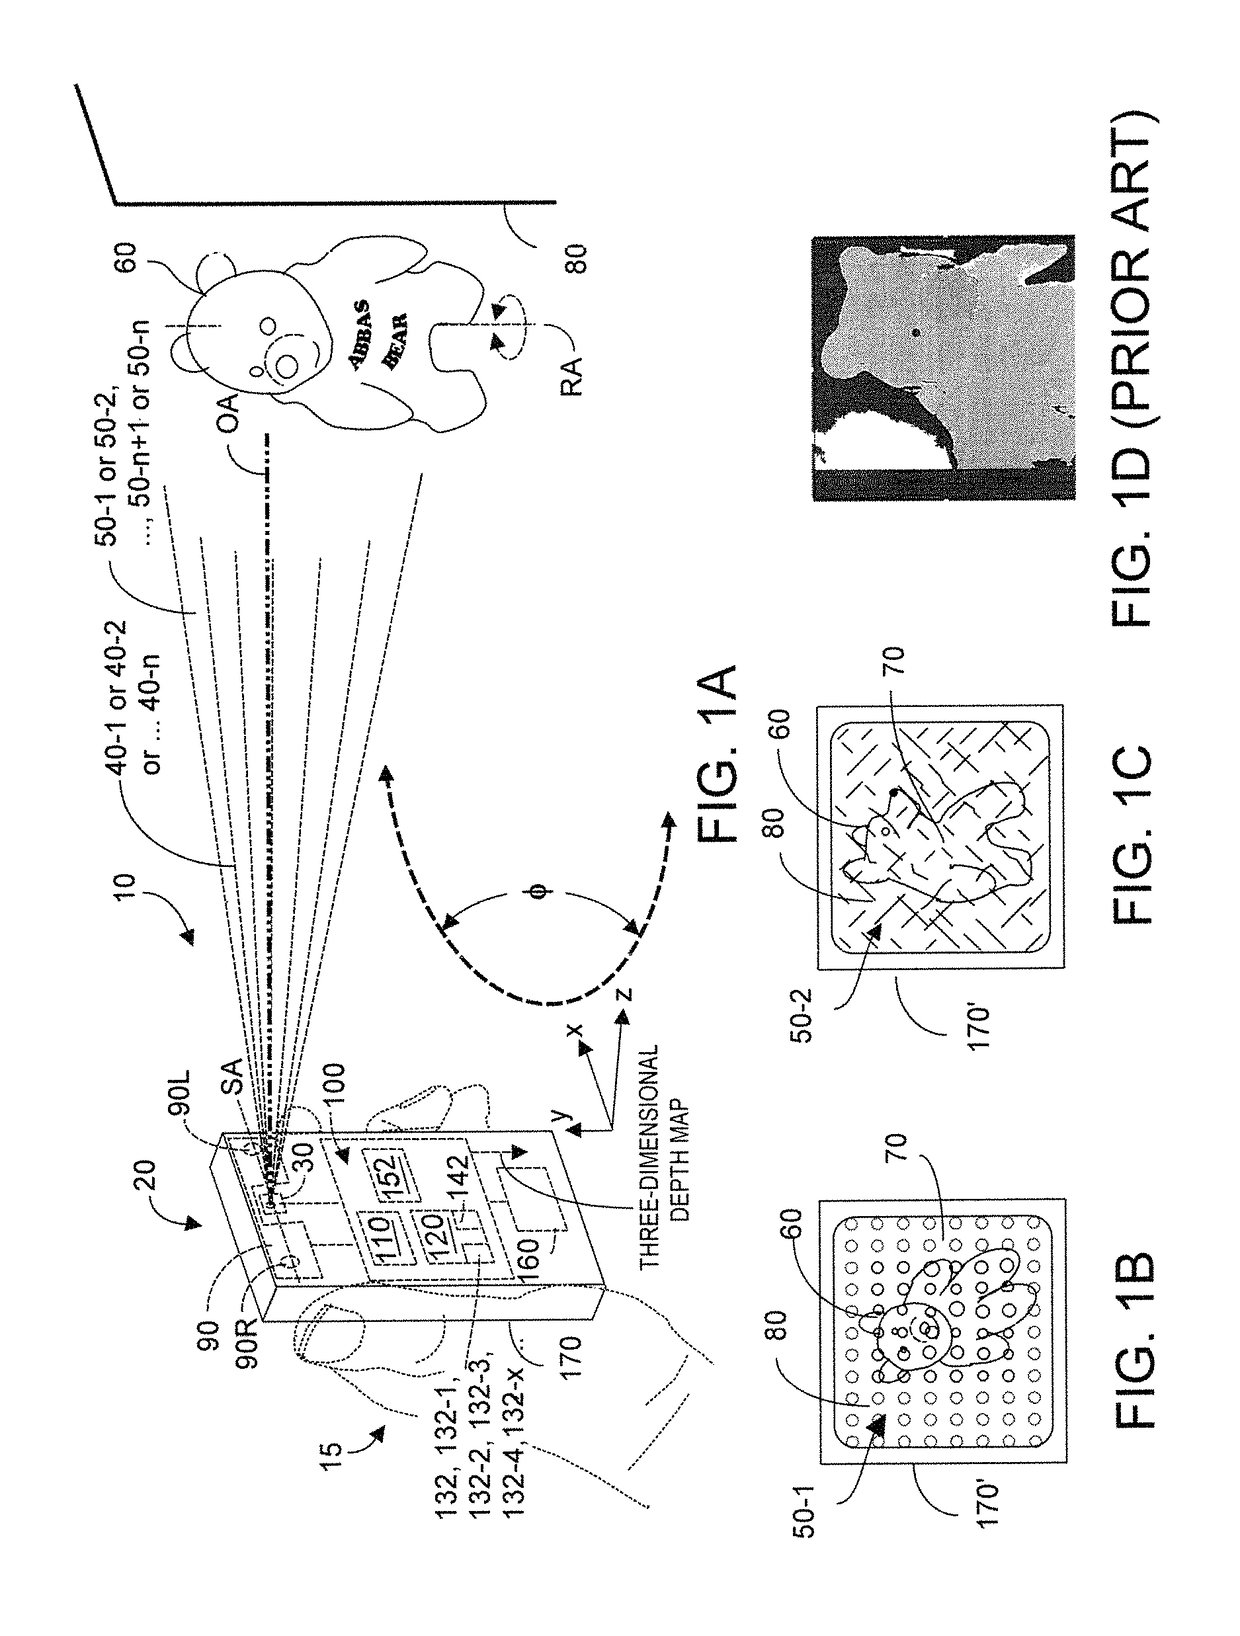 Systems and methods for compact space-time stereo three-dimensional depth sensing